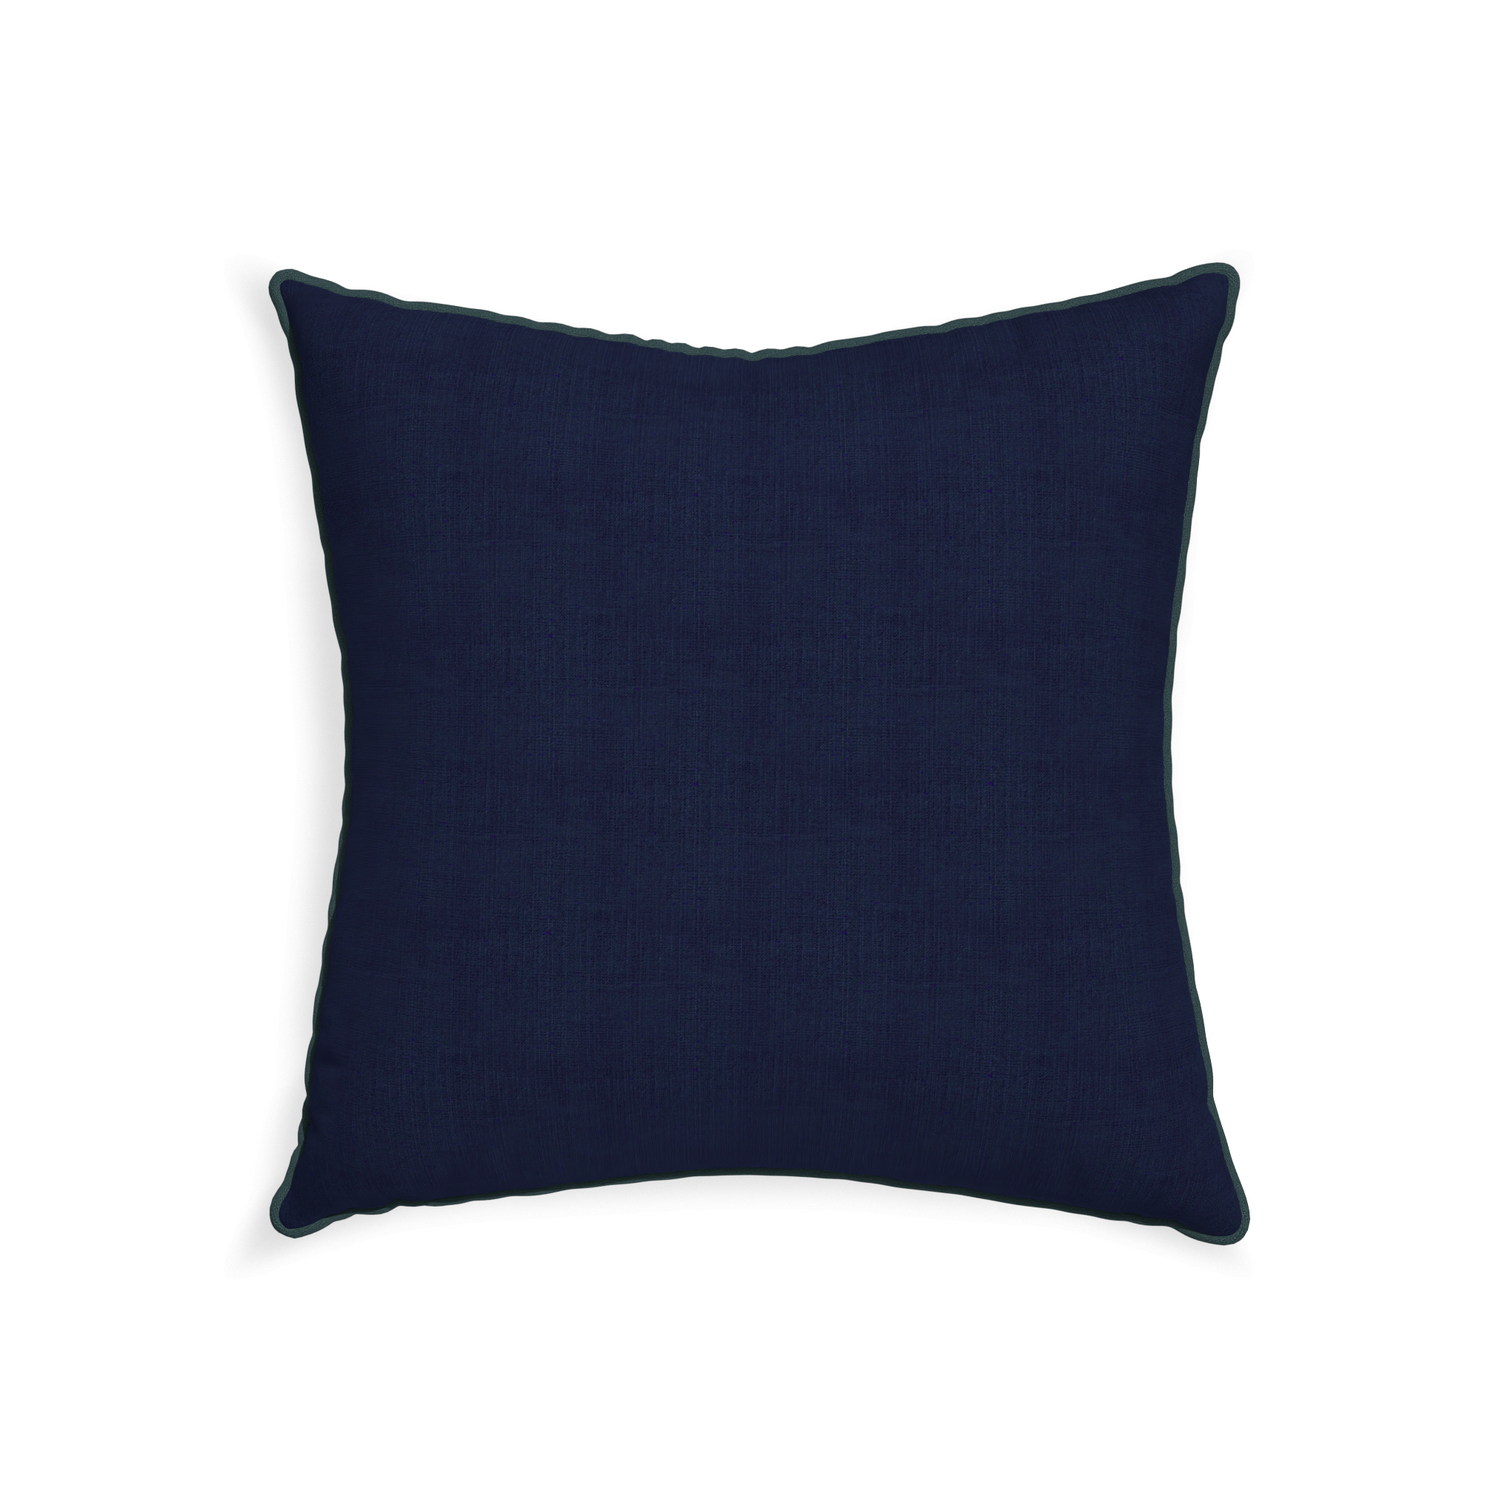 22-square midnight custom navy bluepillow with p piping on white background